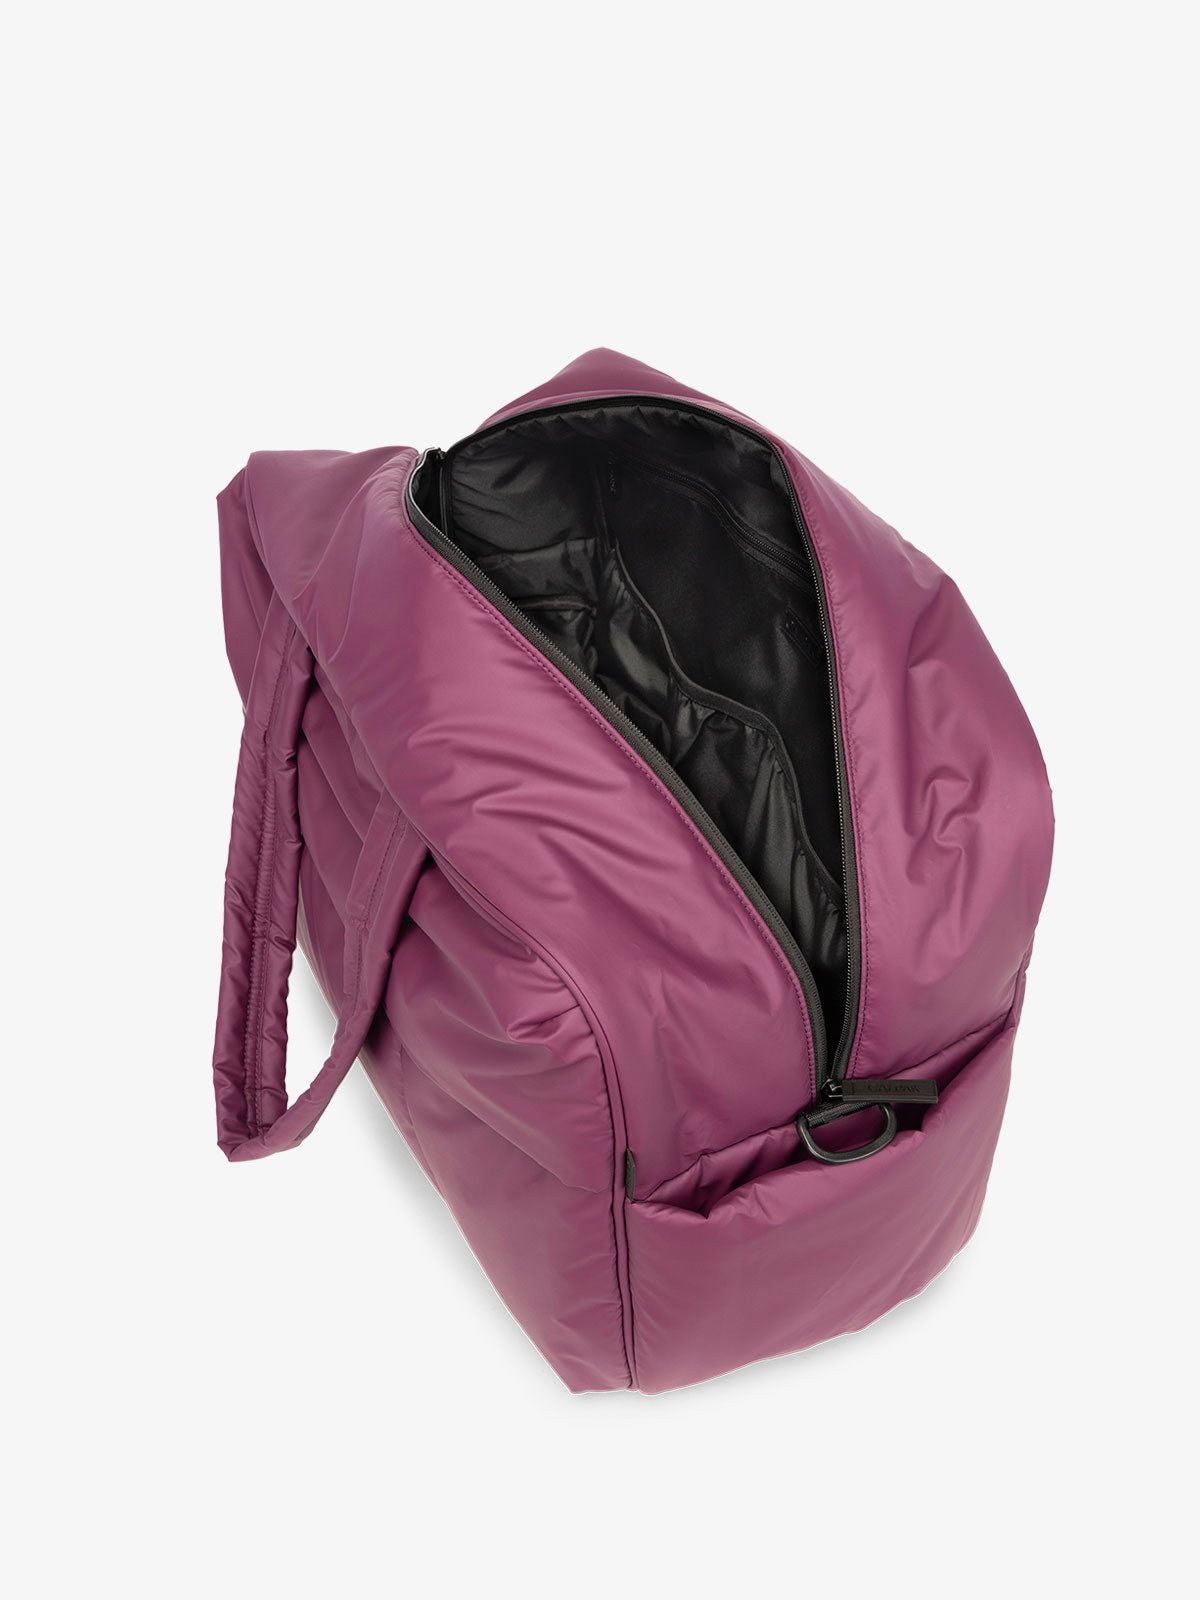 CALPAK water resistant Luka large duffel with multiple pockets and top handles in plum purple